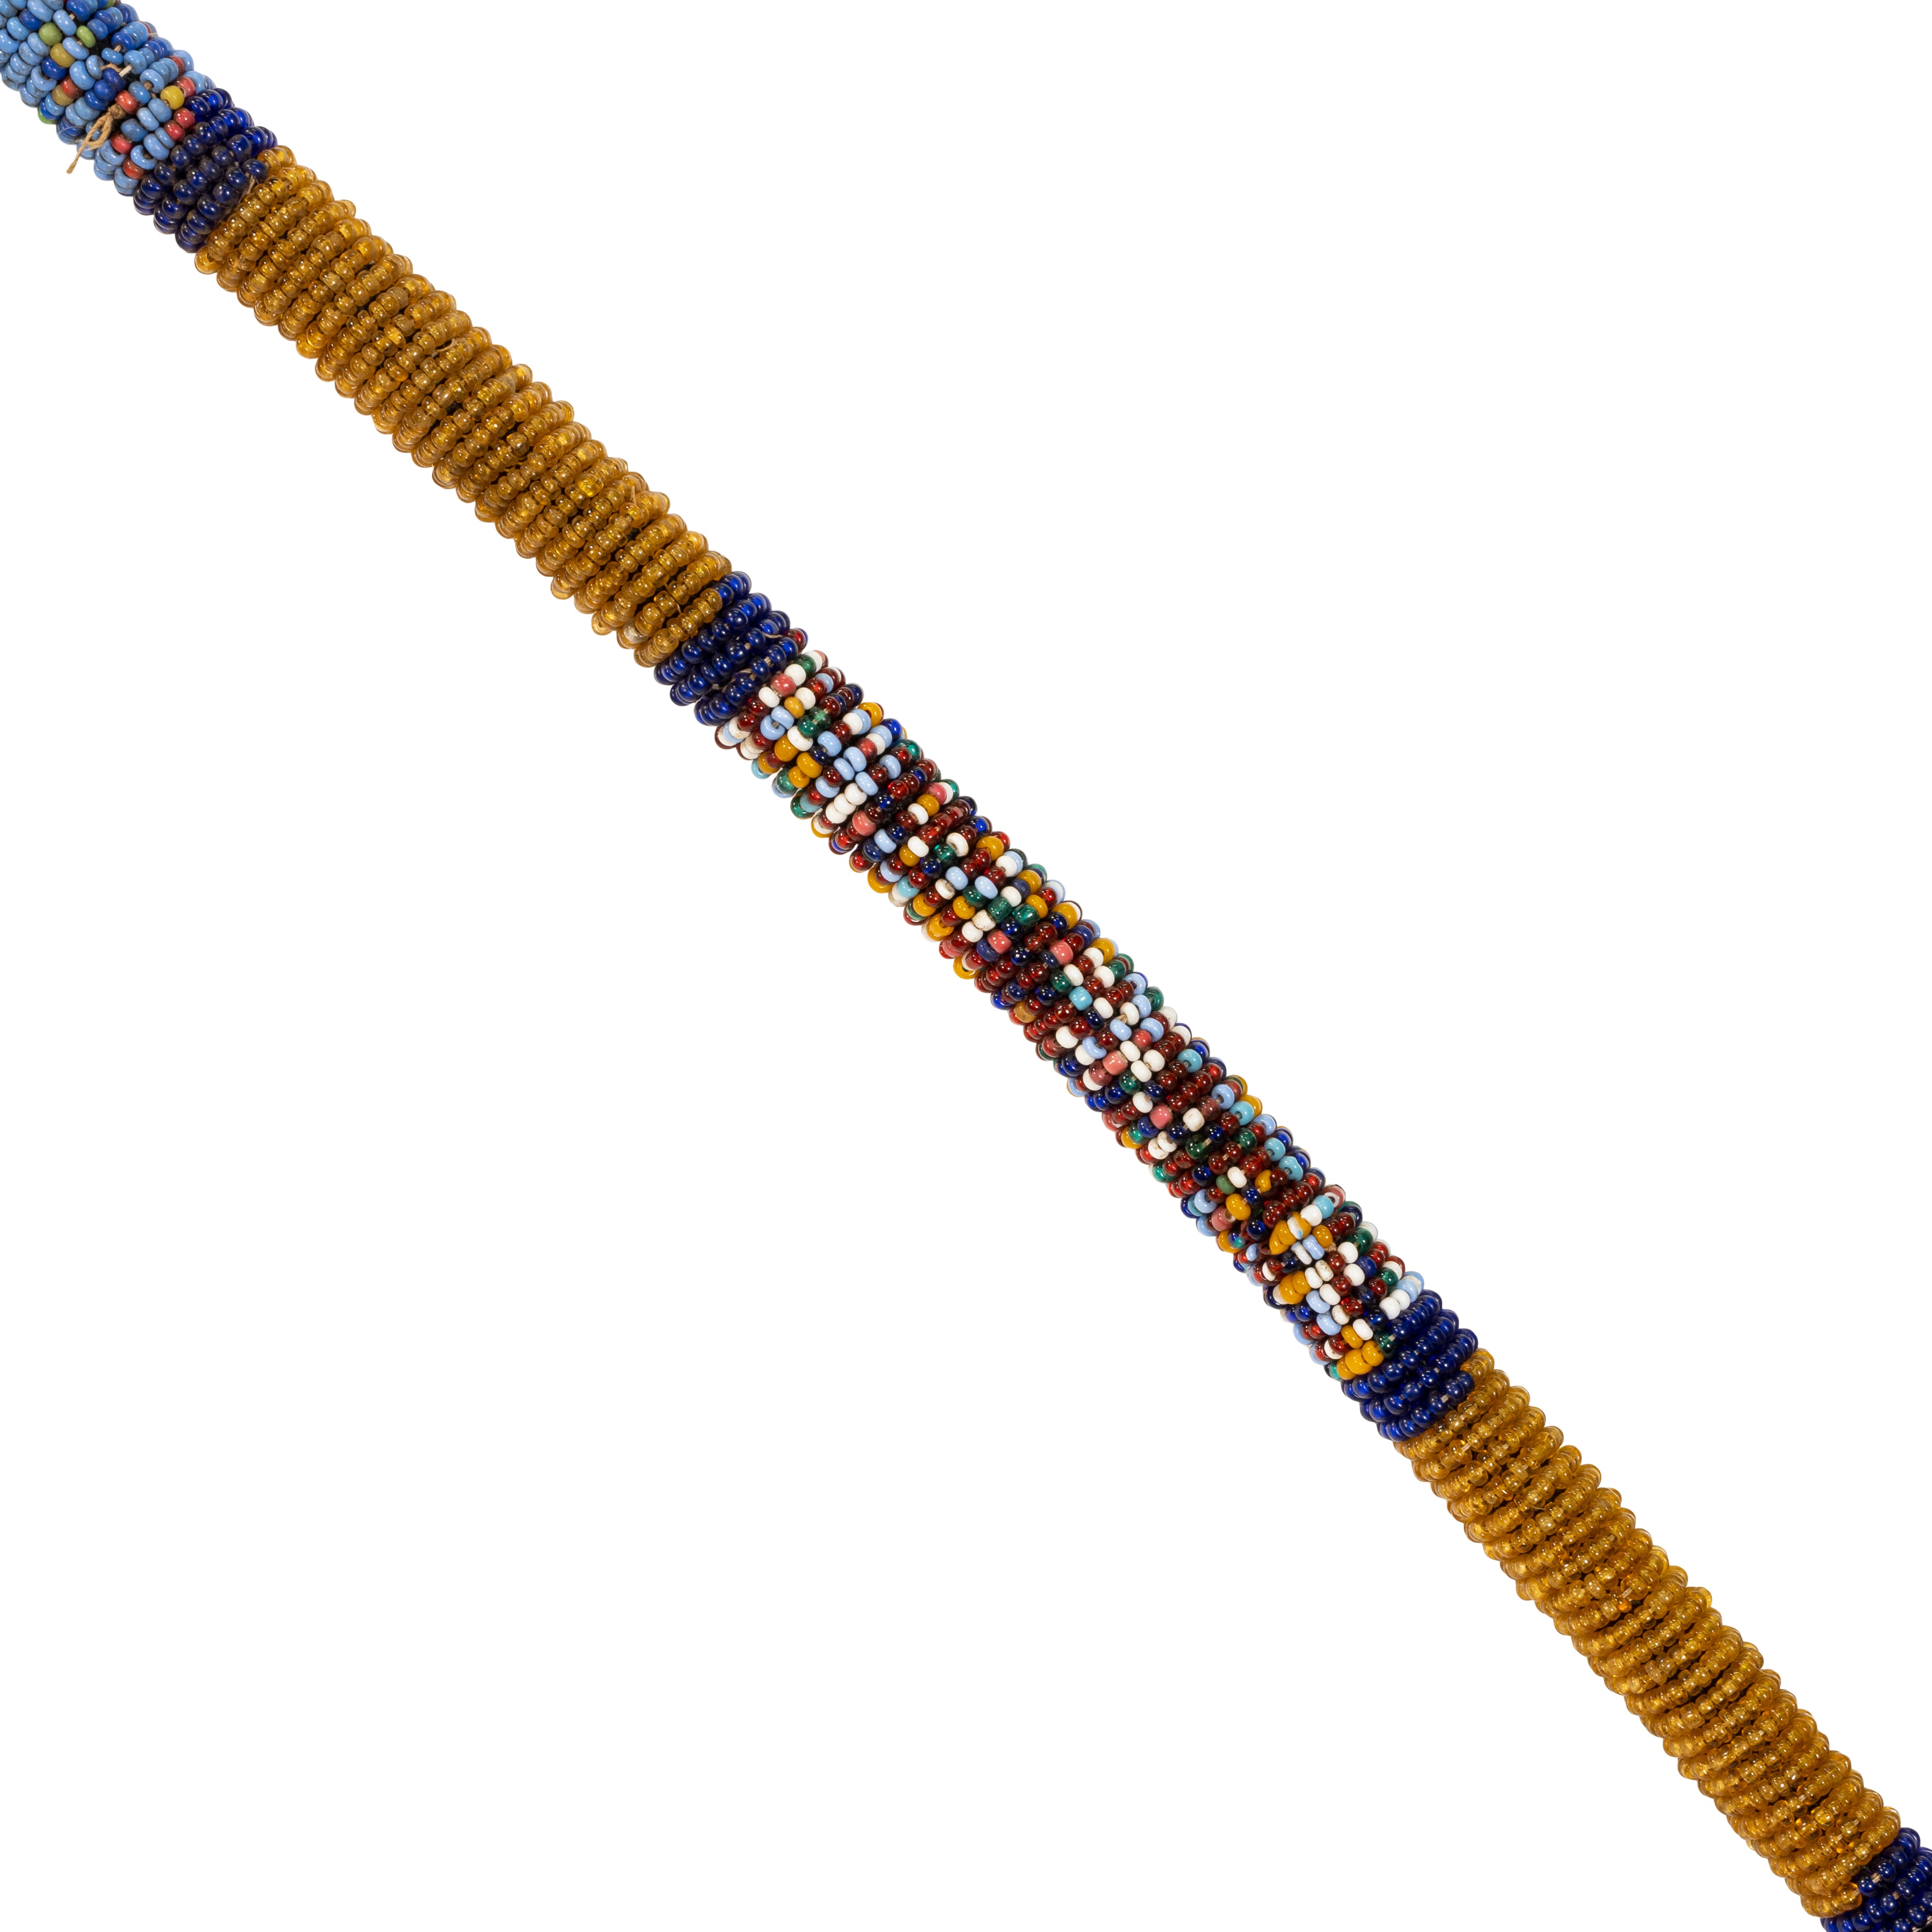 Sioux Beaded Drum Beater